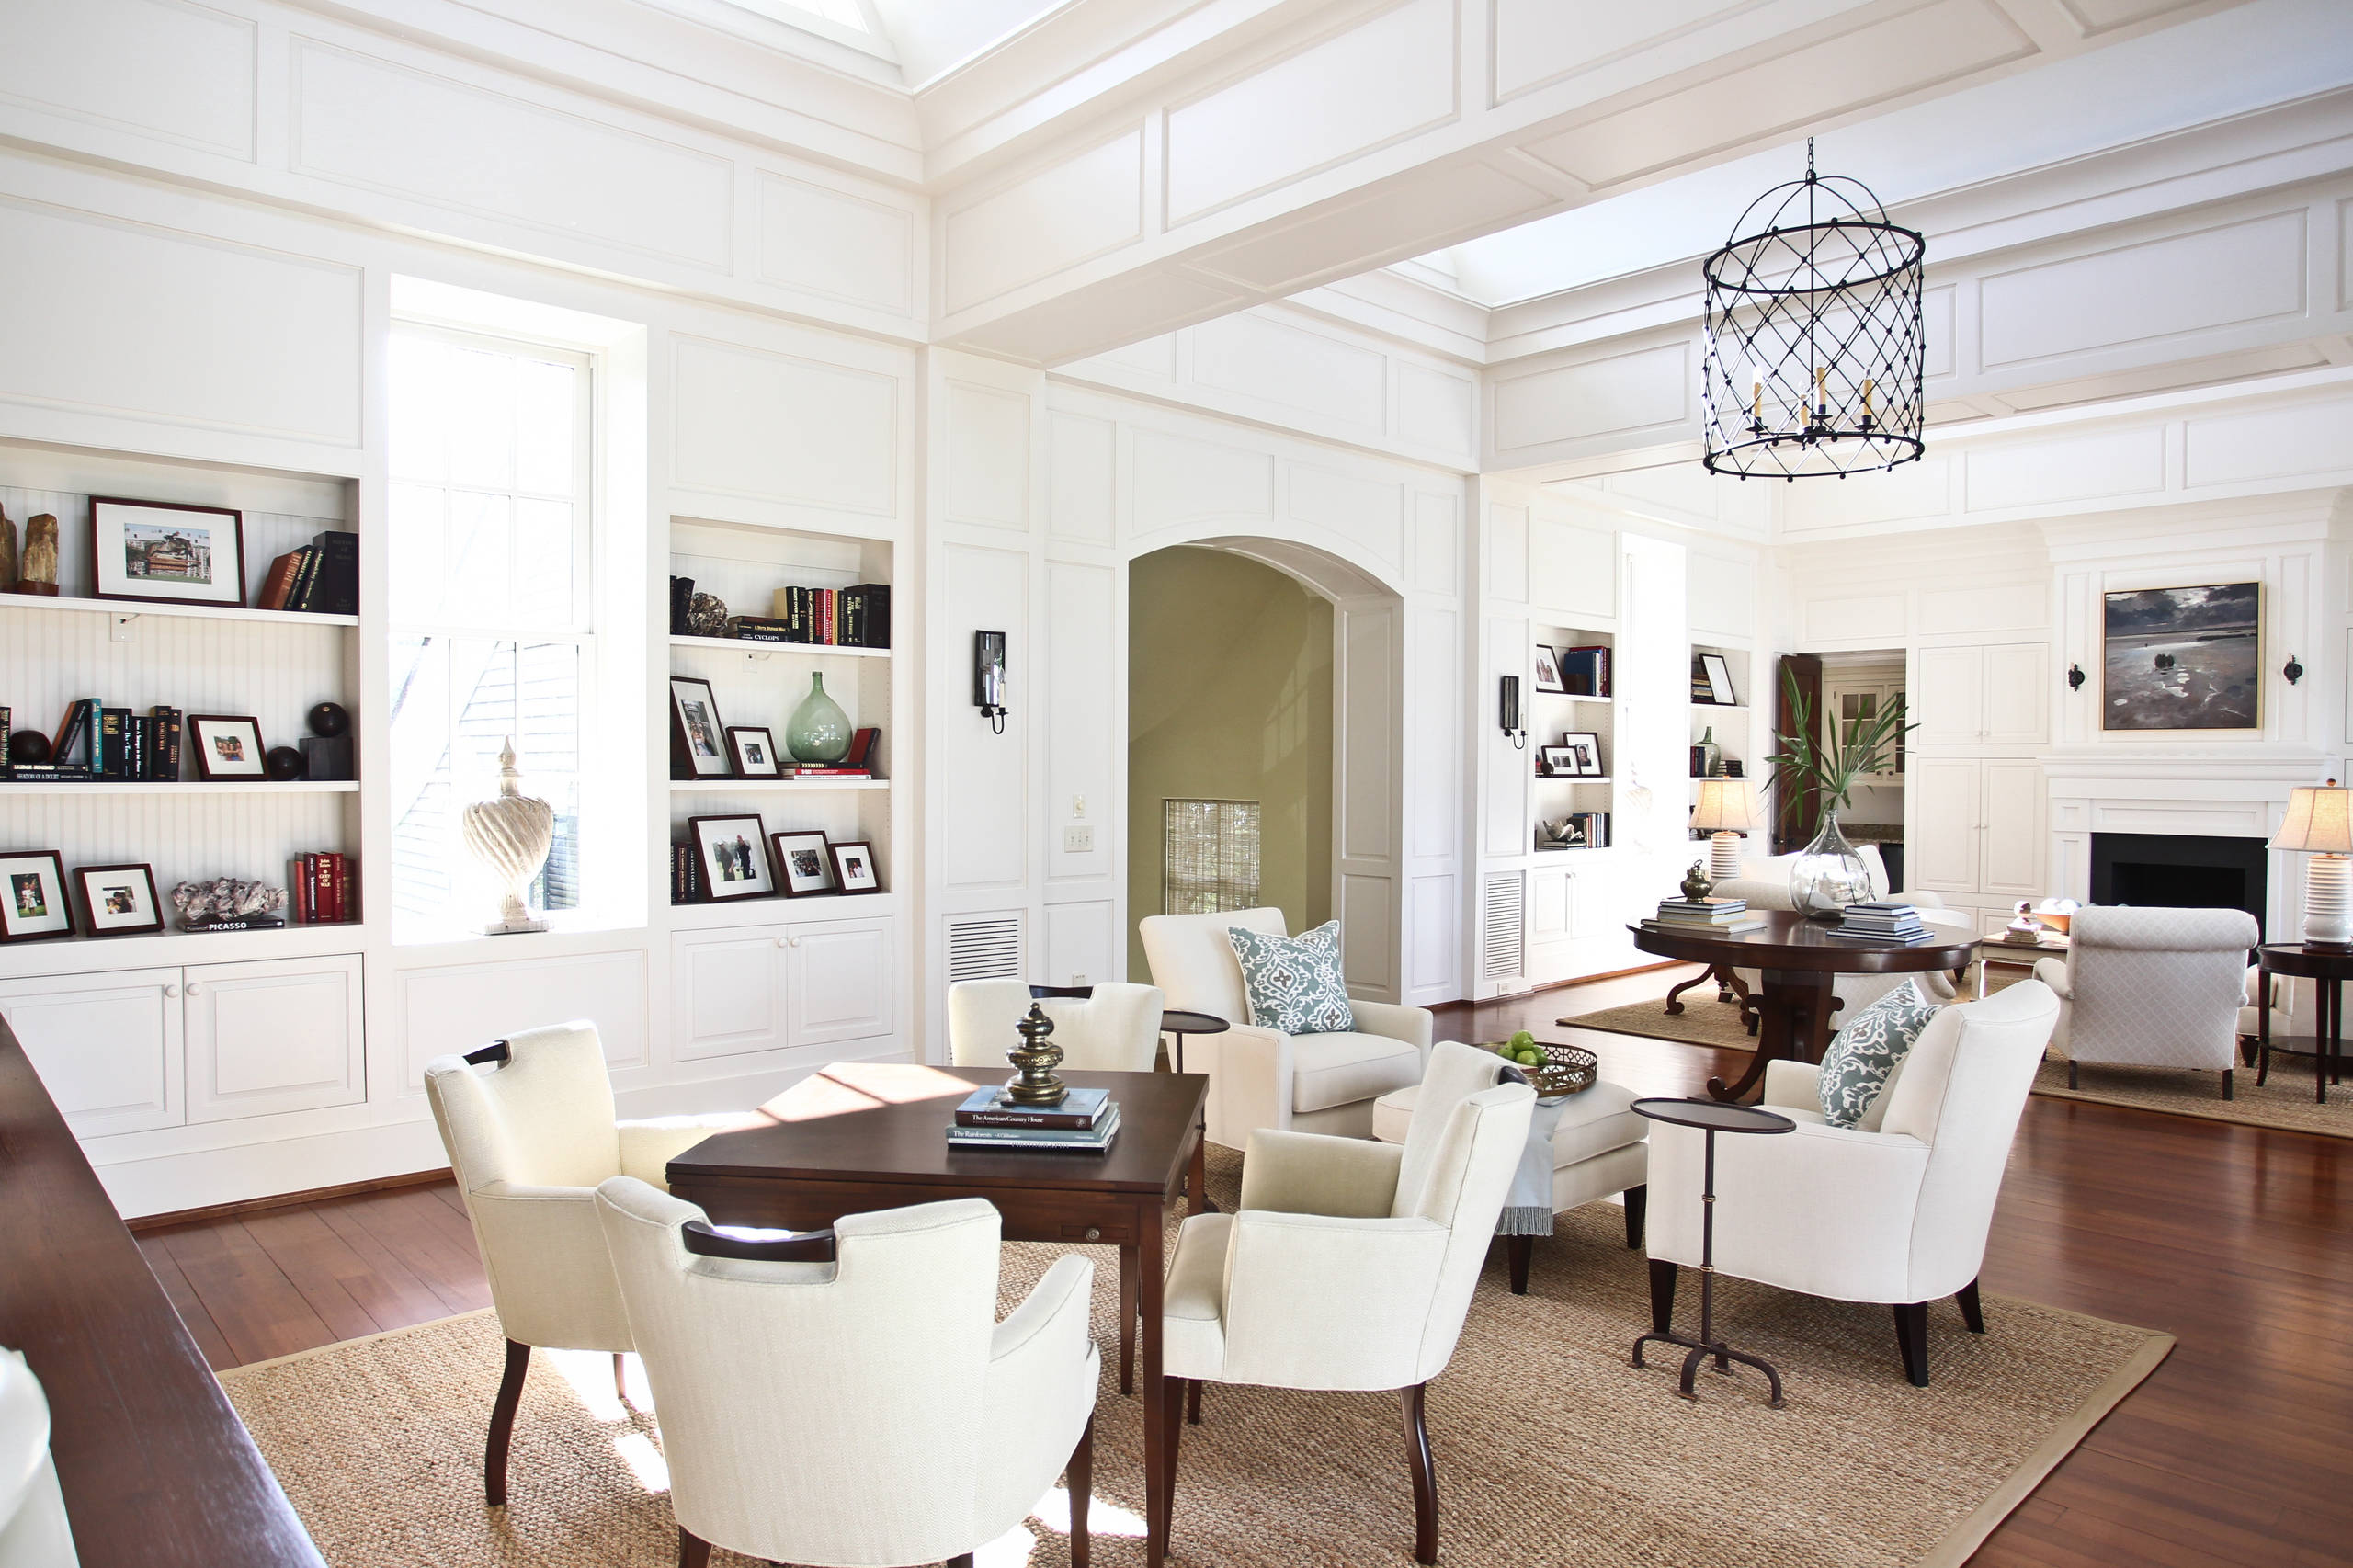 game table in living room - photos & ideas | houzz